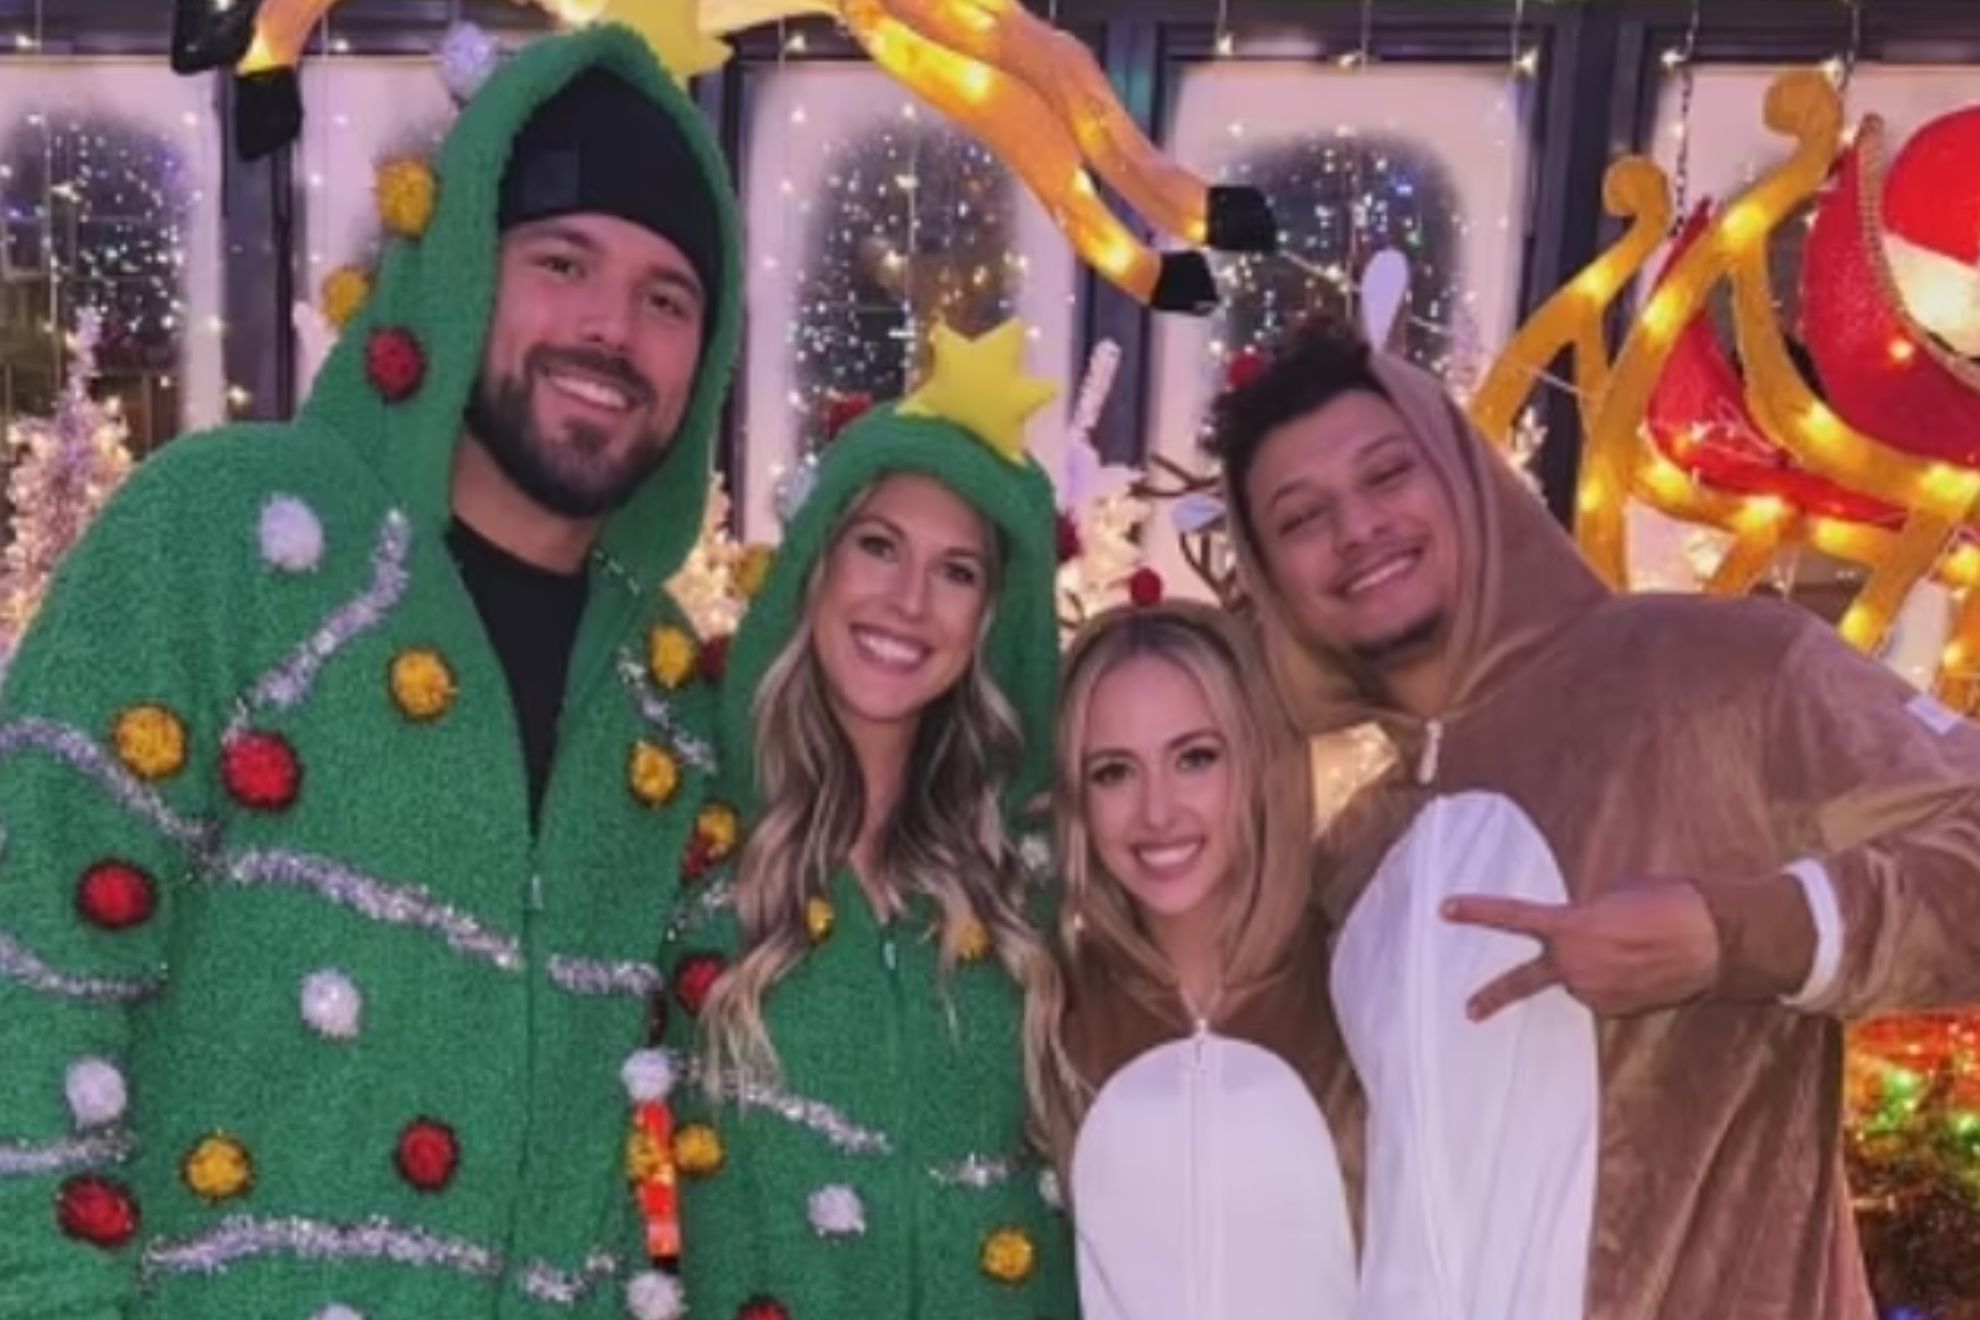 Christmas comes early for The Mahomes, who trade Traylor for new couple